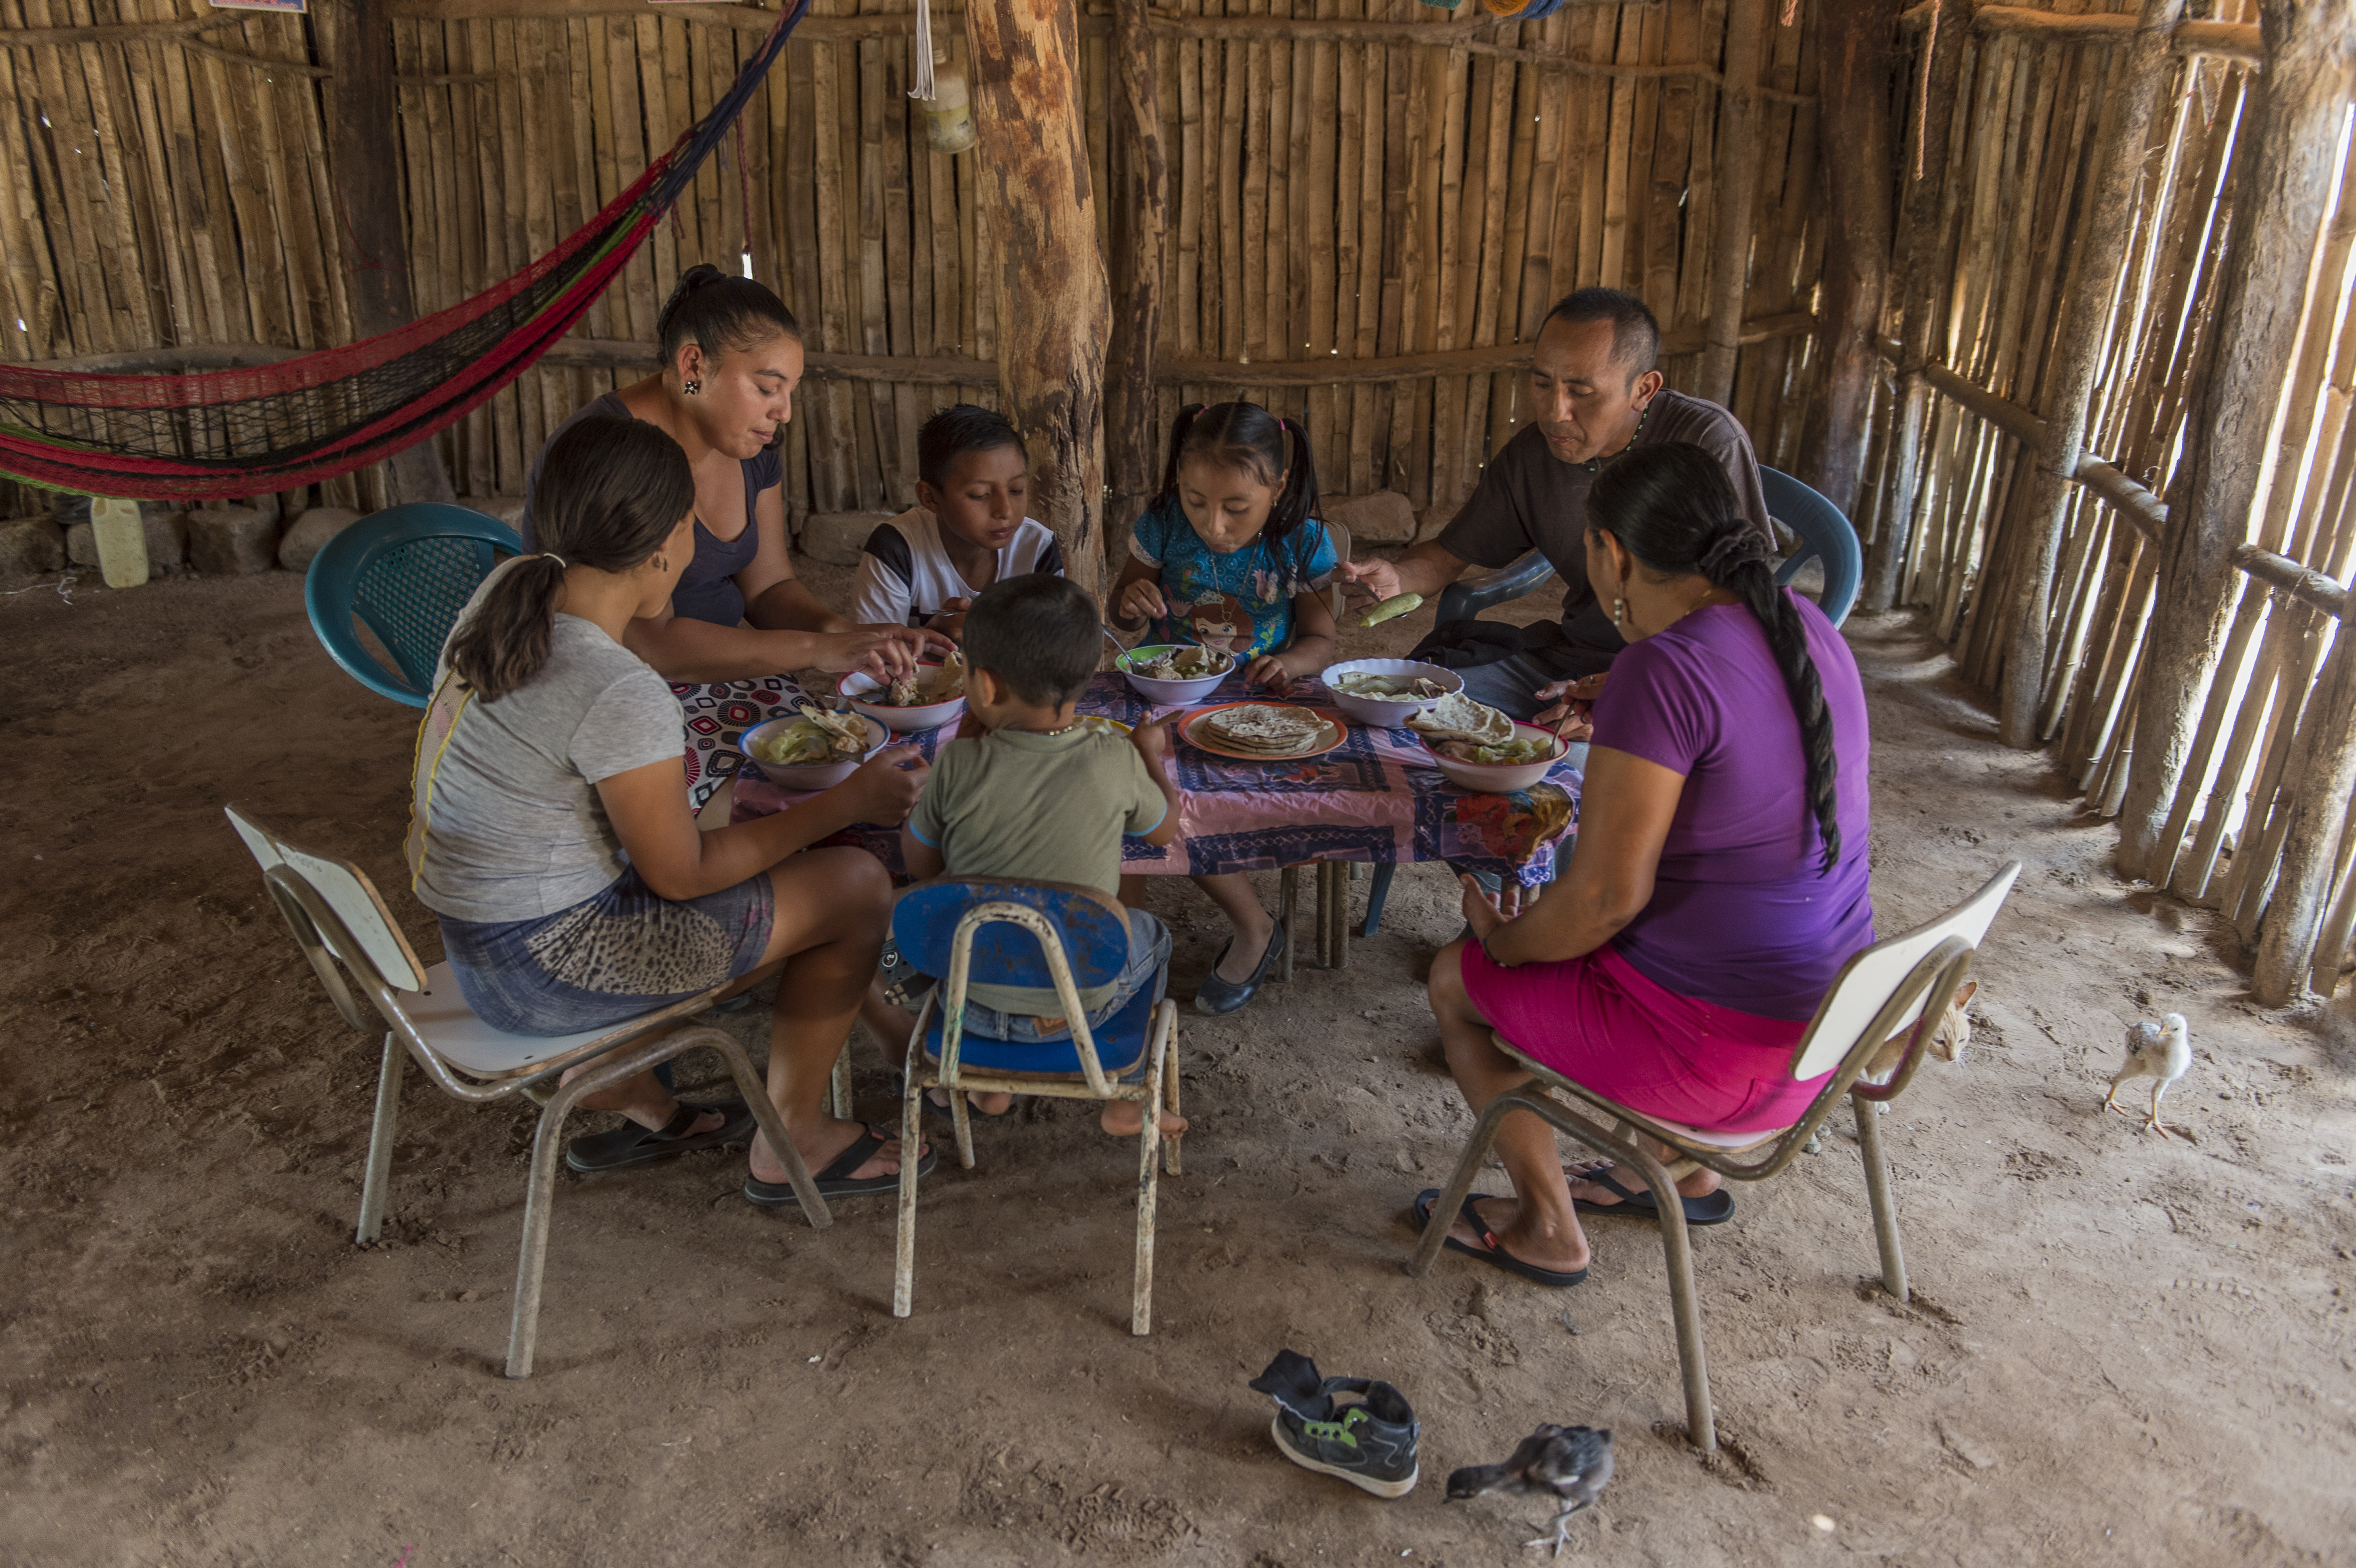 A family shares a nutritious meal of chicken soup: however, rural poverty in El Salvador often results in lack of dietary diversity.  